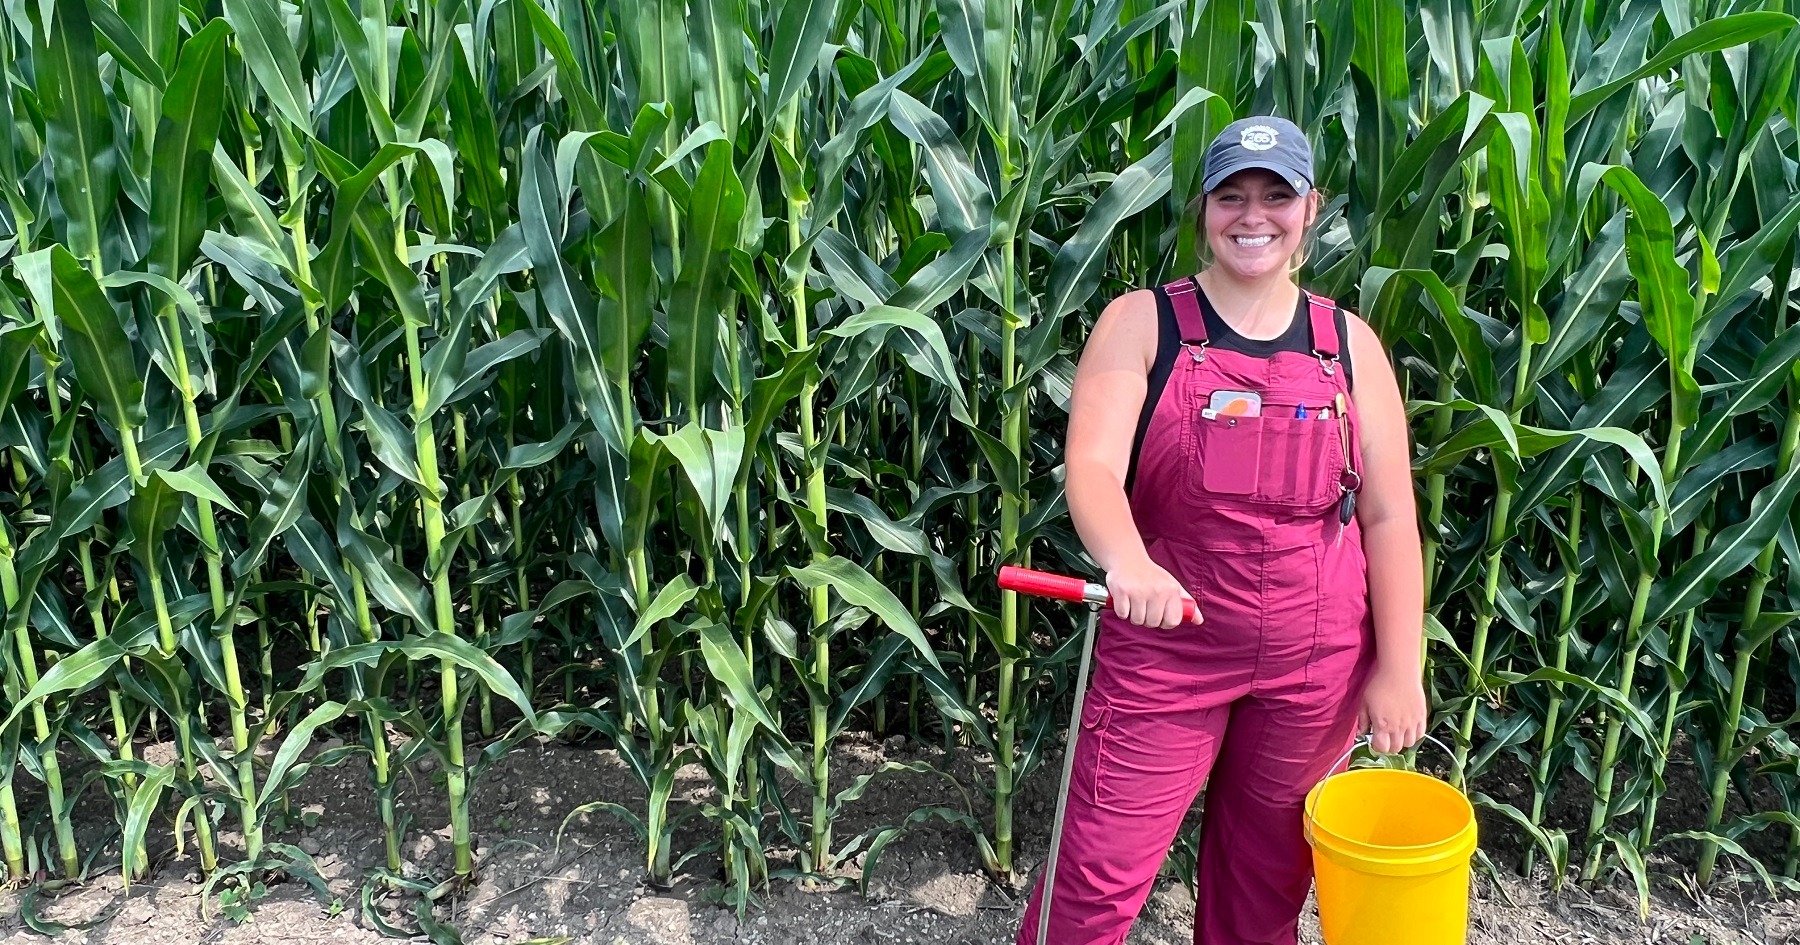 Student Madelyn Pierce poses with a red soil probe and yellow bucket in front of a tall, green field of corn